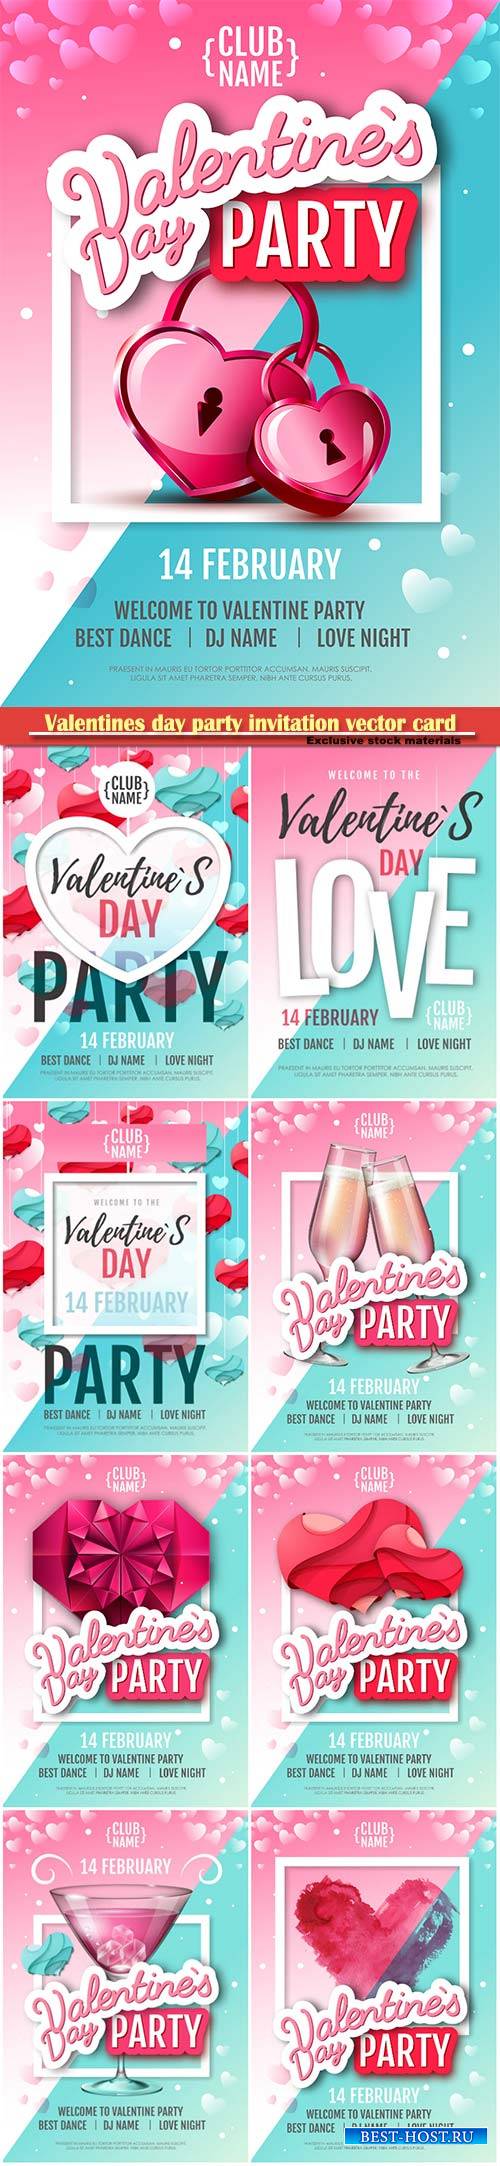 Valentines day party invitation vector card # 12